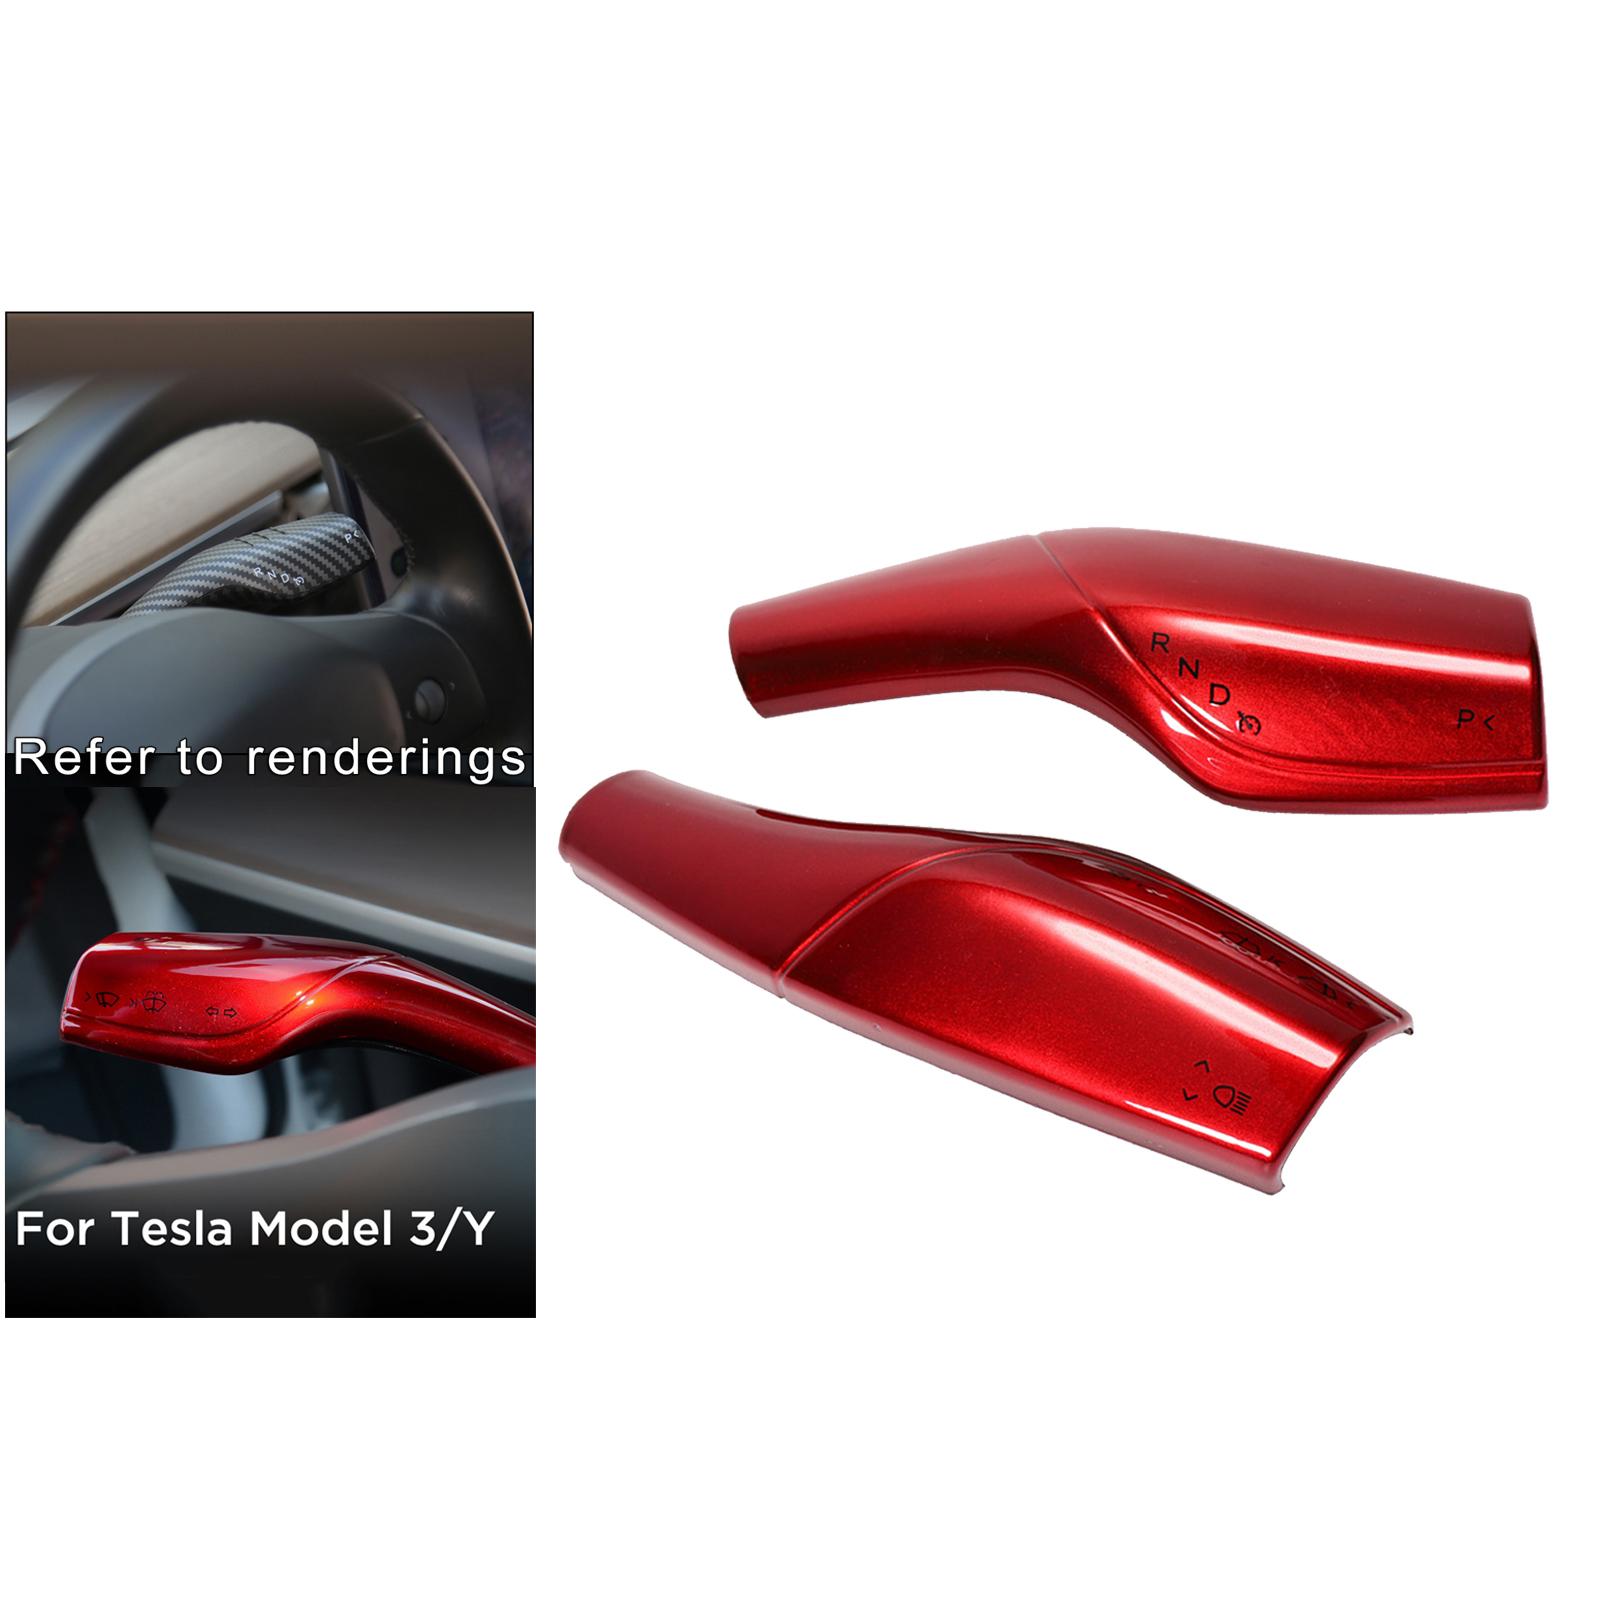 2x Wiper Gear Lever Cover fits for Tesla Model 3 Y Spare Parts Red